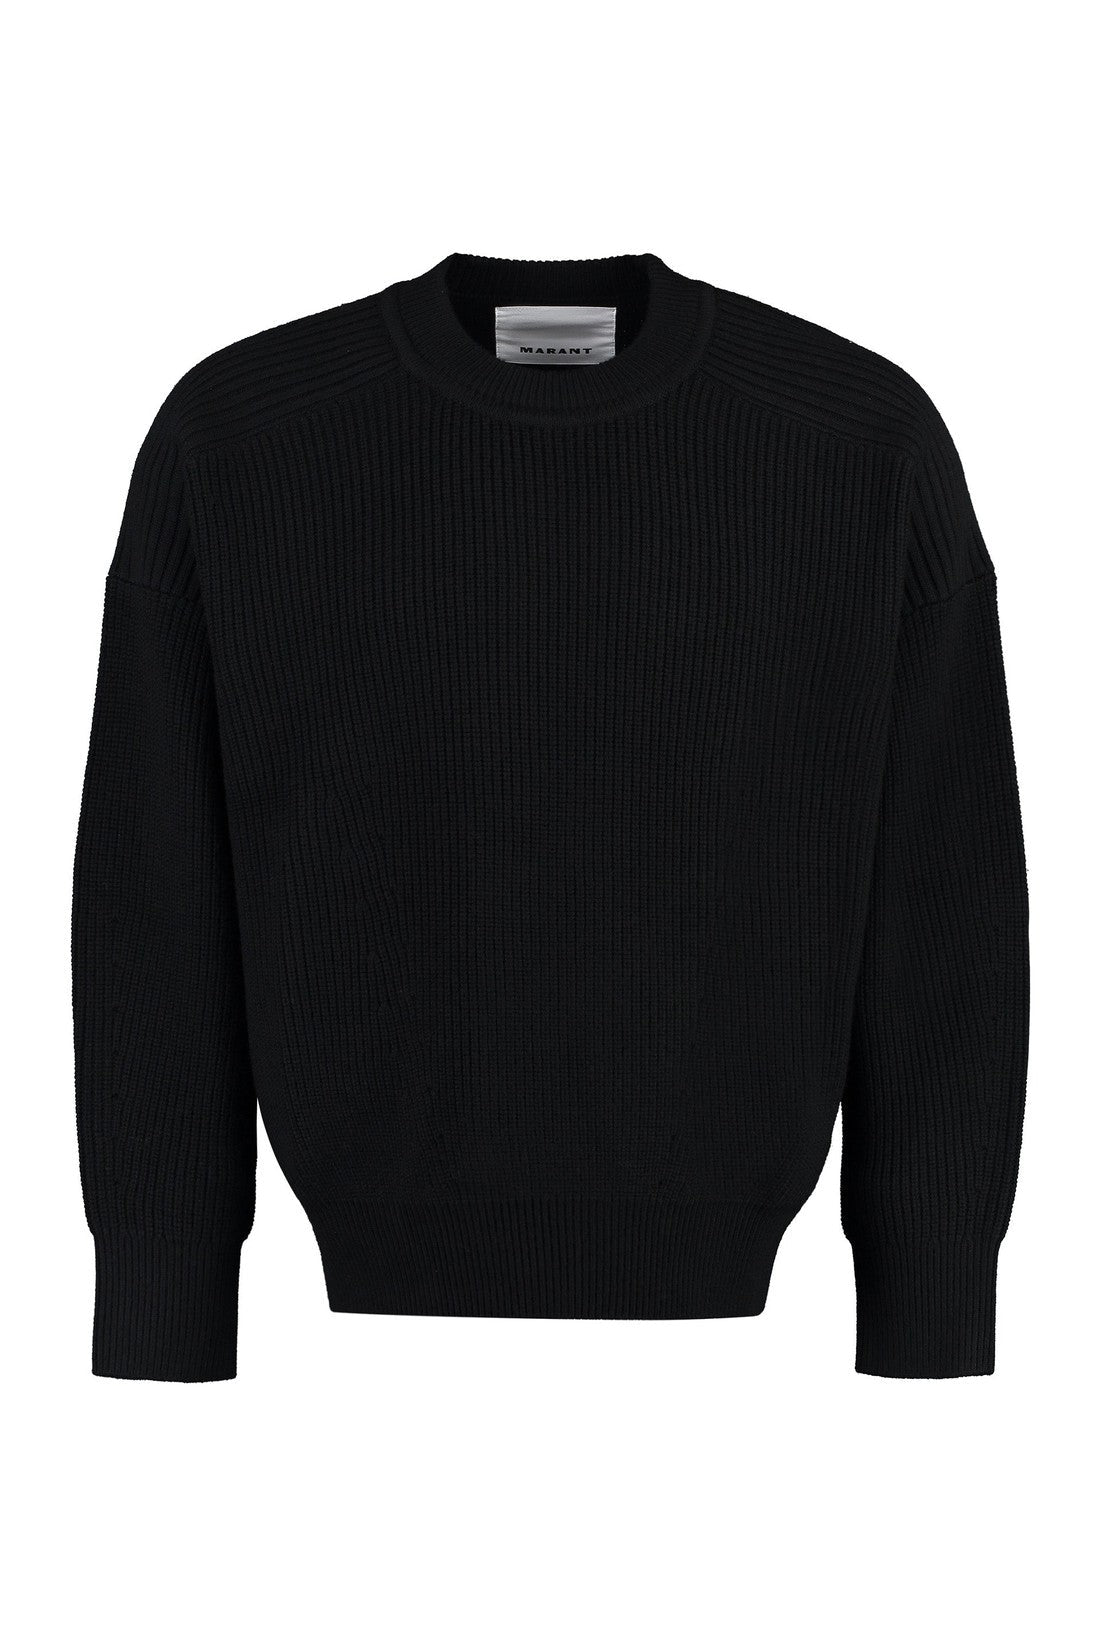 Marant-OUTLET-SALE-Barry wool crew-neck sweater-ARCHIVIST